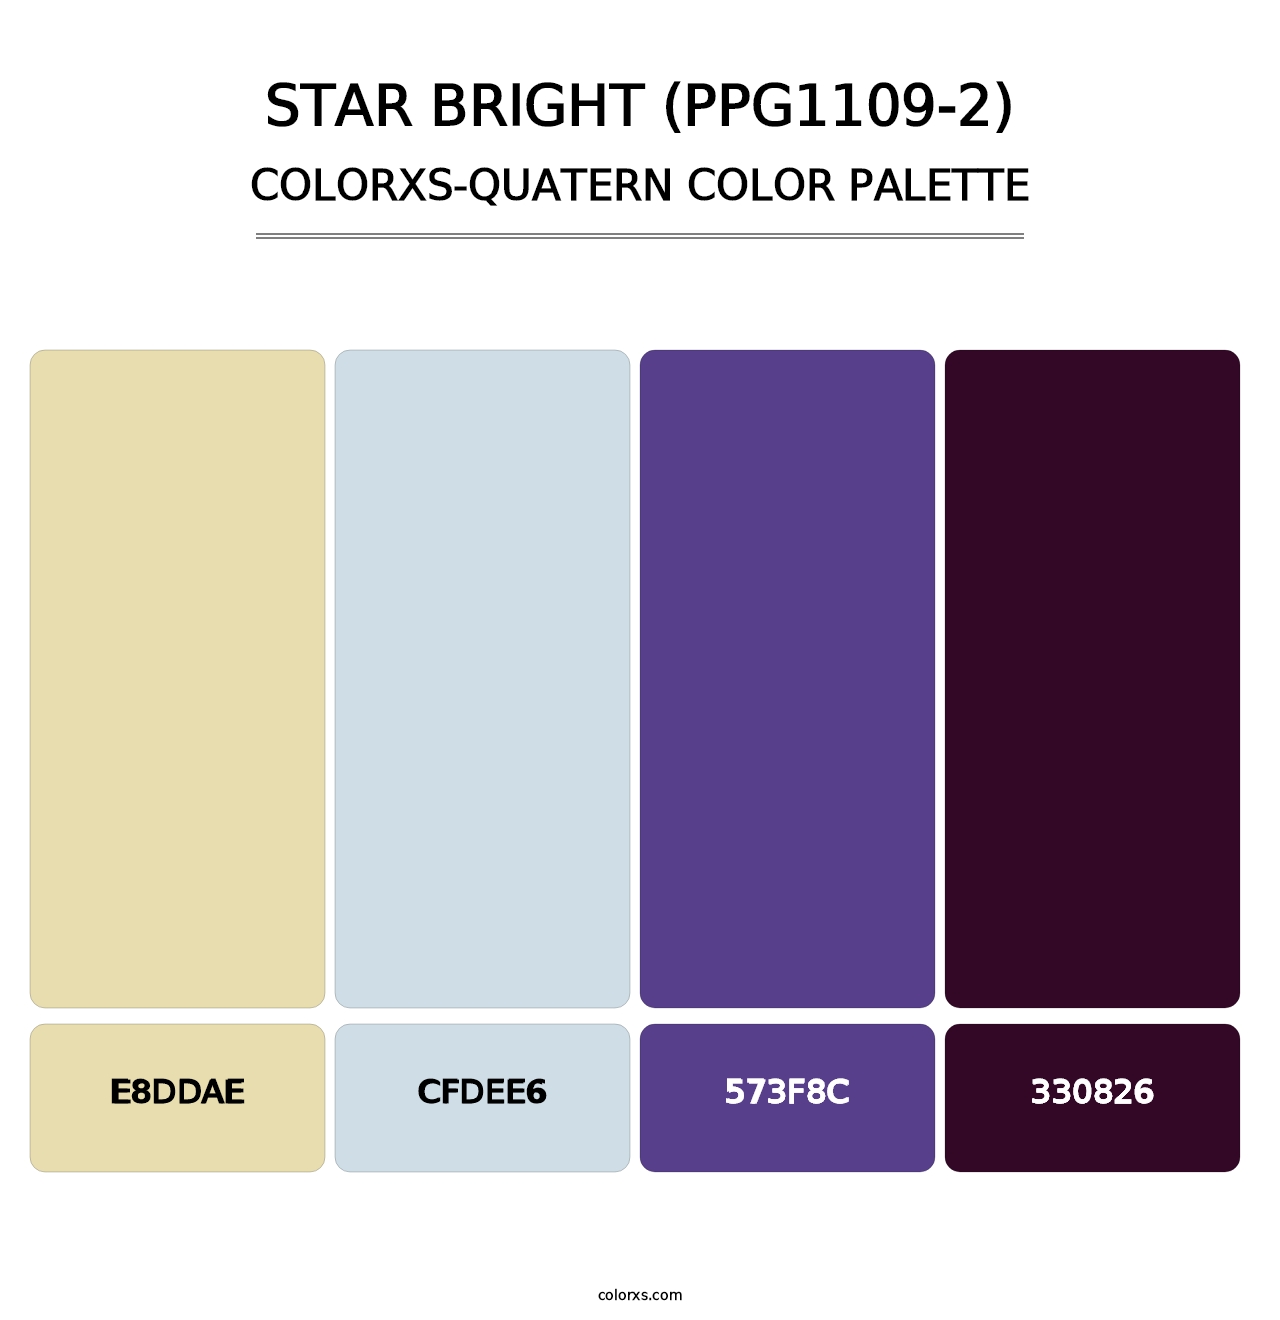 Star Bright (PPG1109-2) - Colorxs Quatern Palette